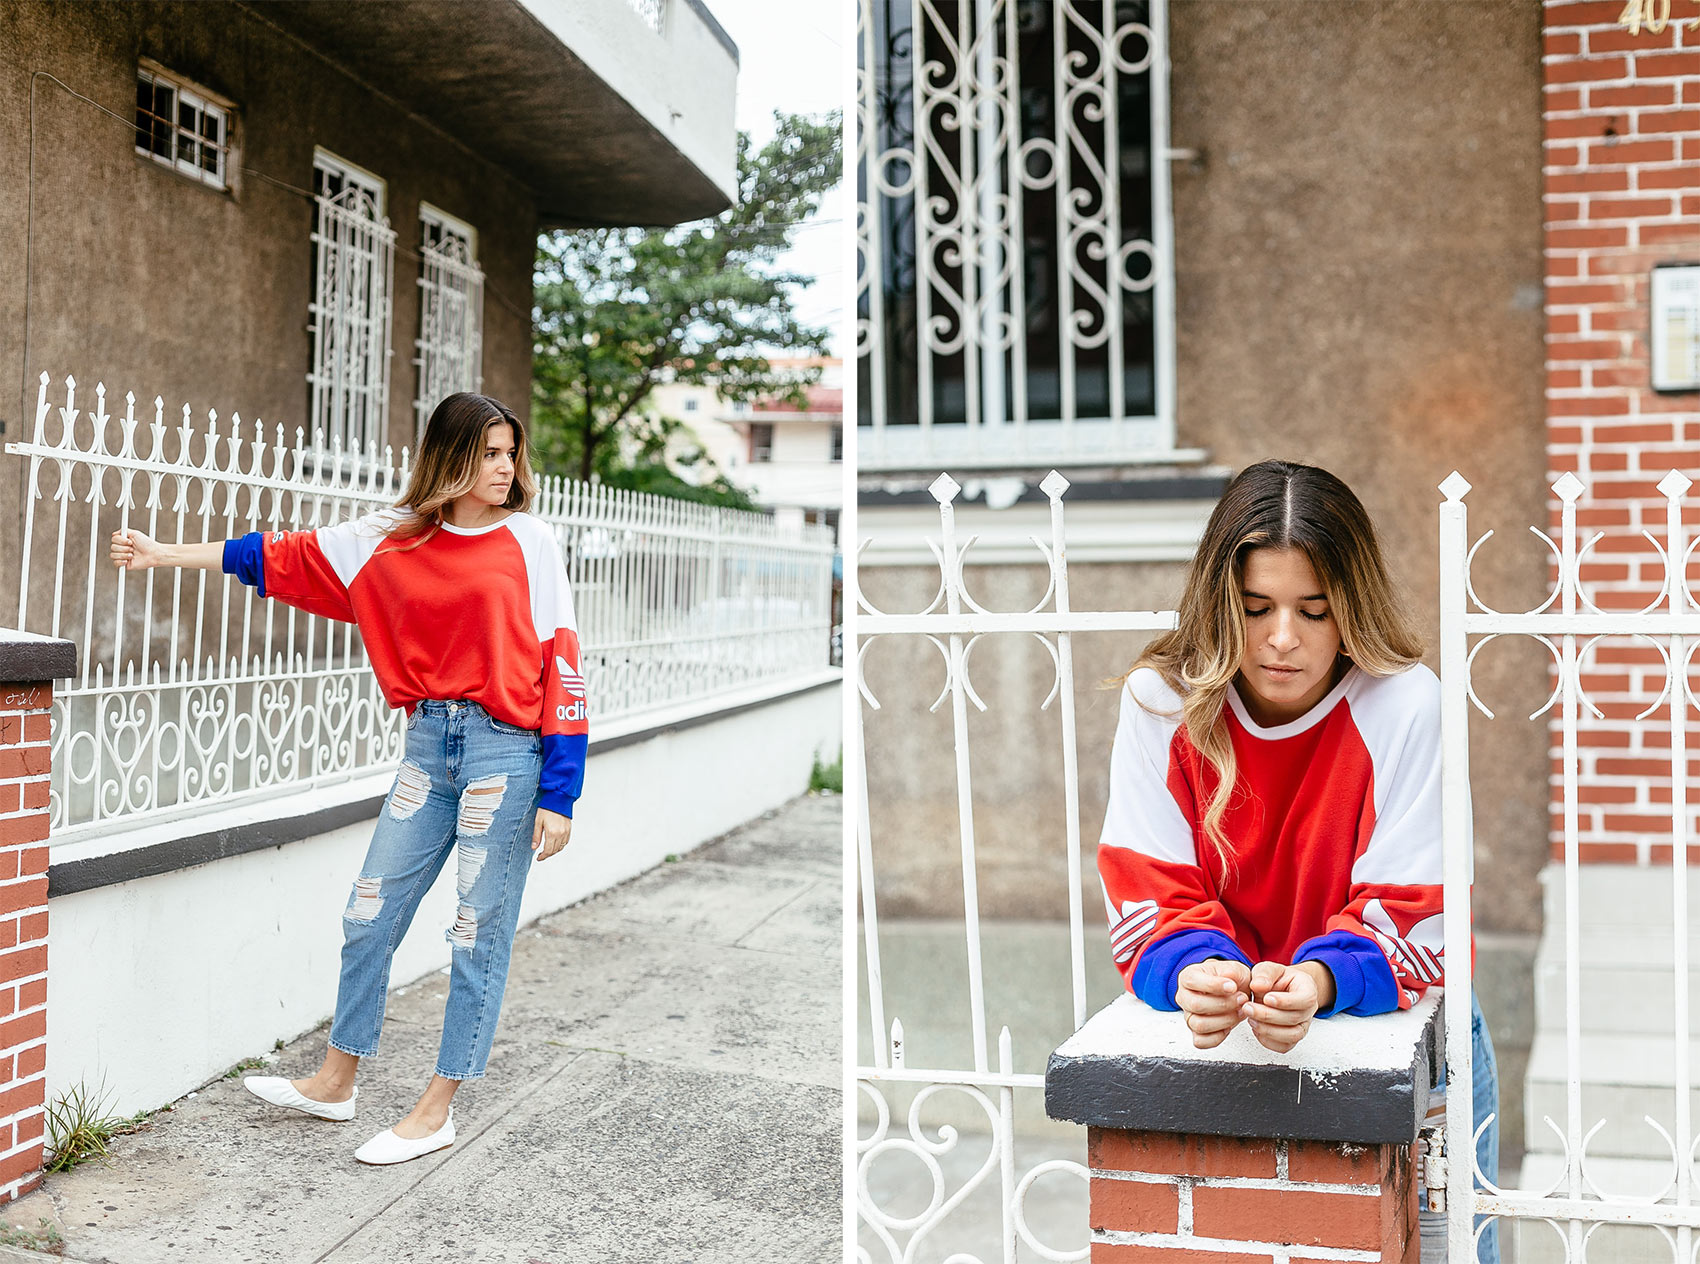 Maristella in a casual french girl inspired outfit with high rise denim